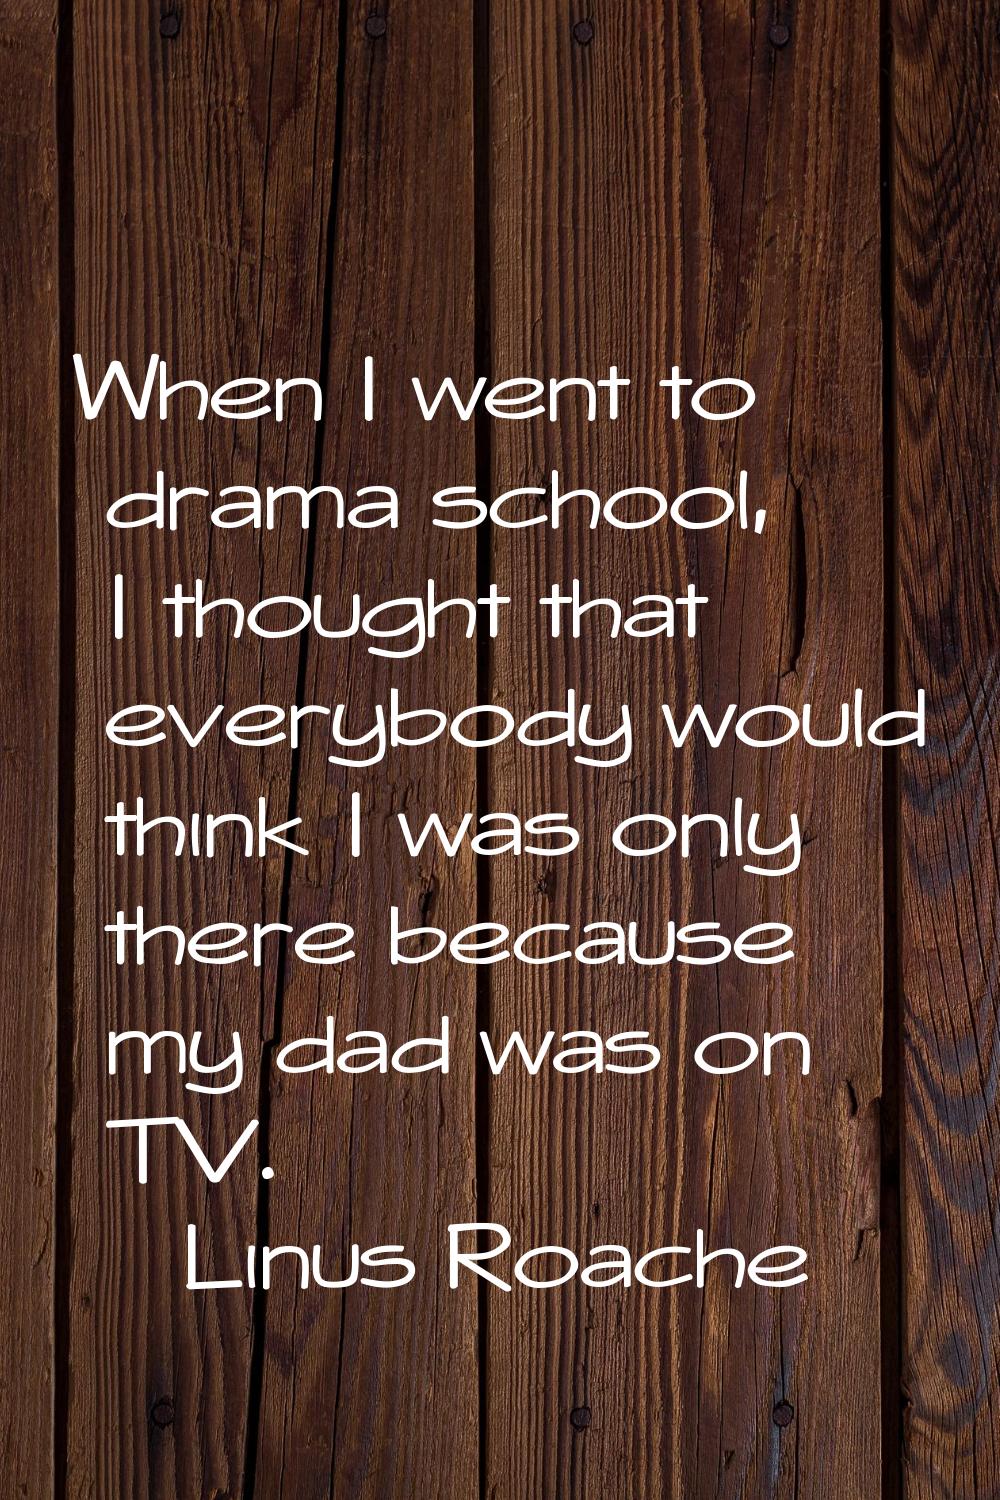 When I went to drama school, I thought that everybody would think I was only there because my dad w